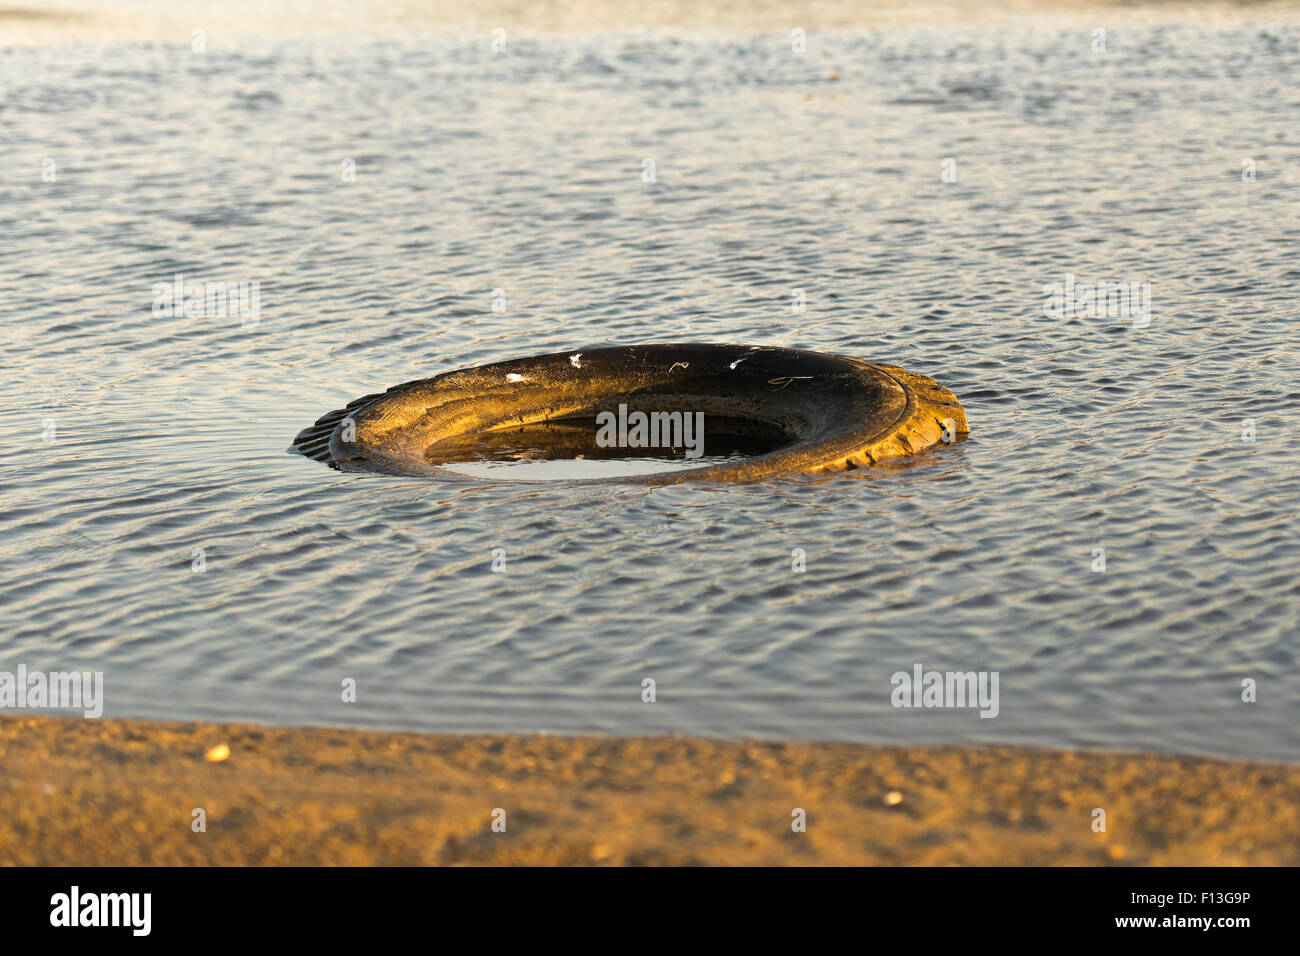 Polluted beach with a truck wheel in it. Stock Photo